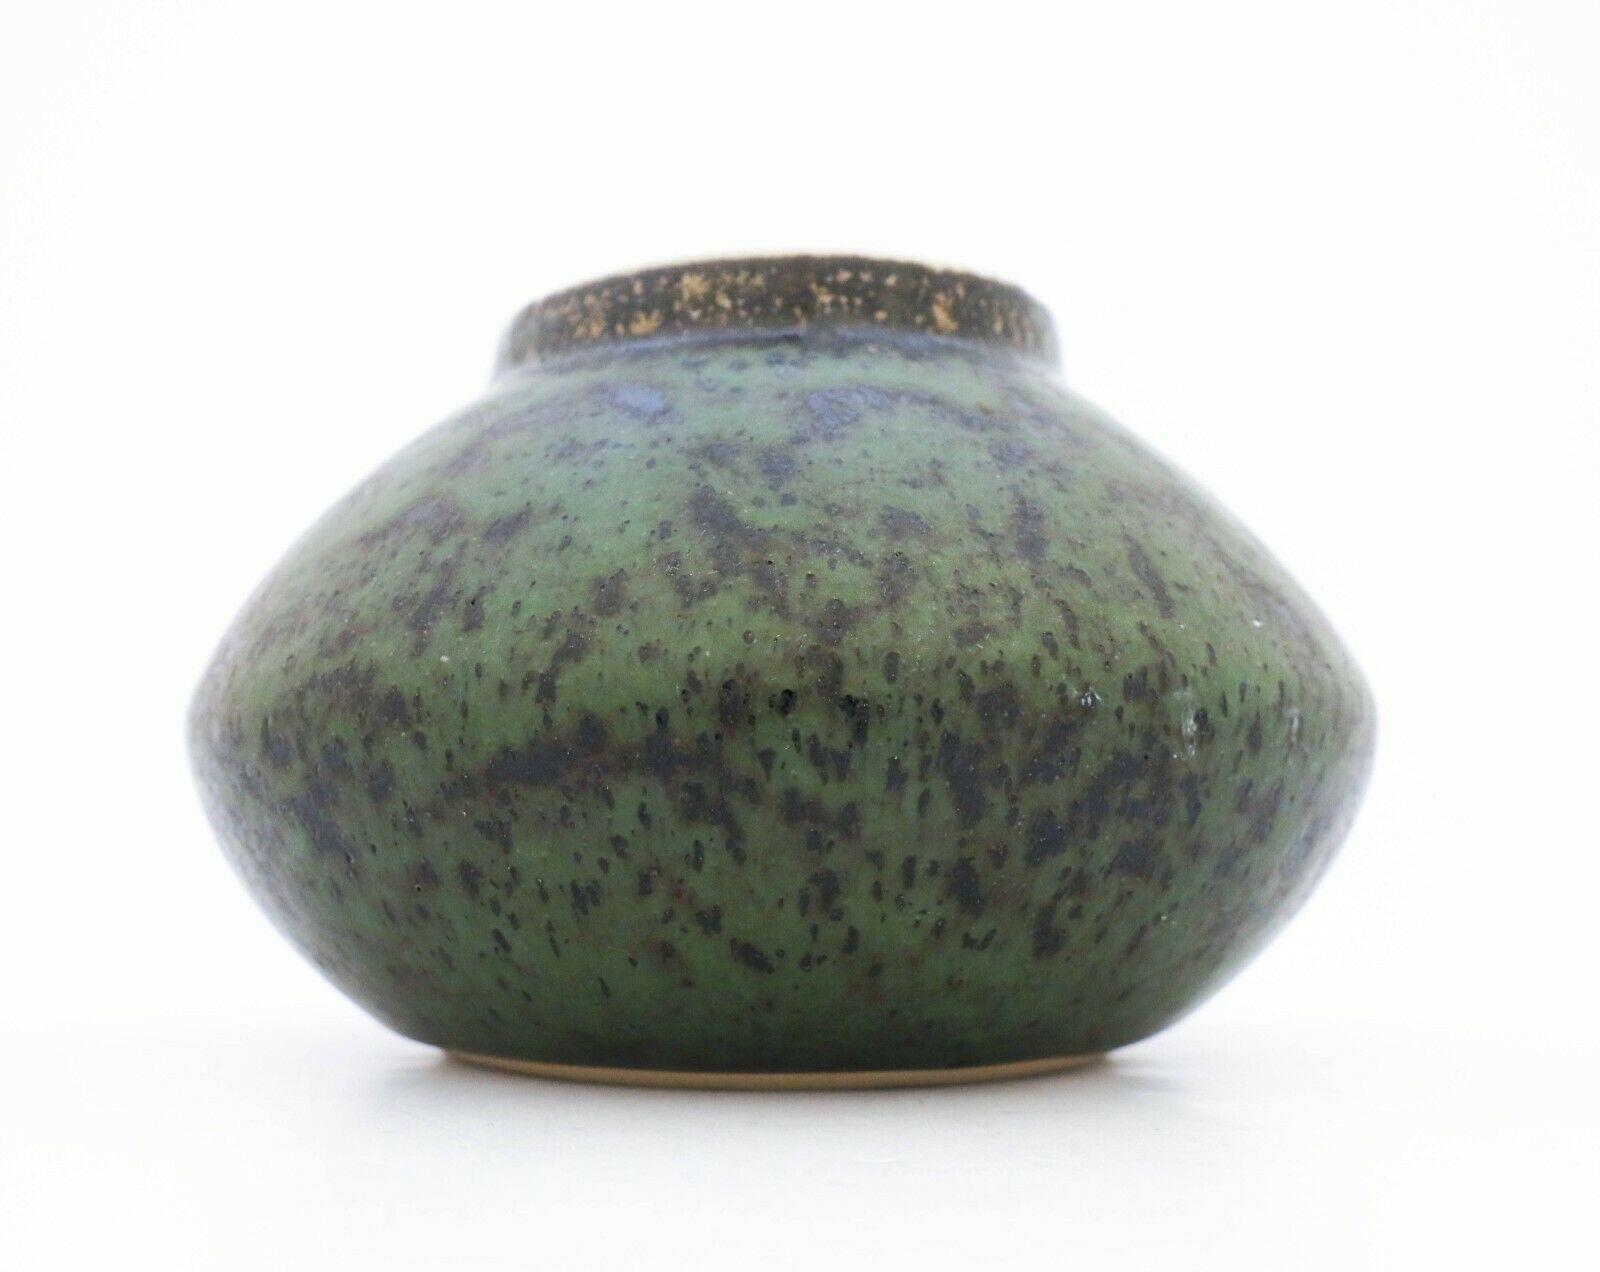 Midcentury Swedish vase in stoneware by Rörstrand, designed by Carl-Harry Stålhane. The vase has an excellent glaze and is in very good vintage condition.